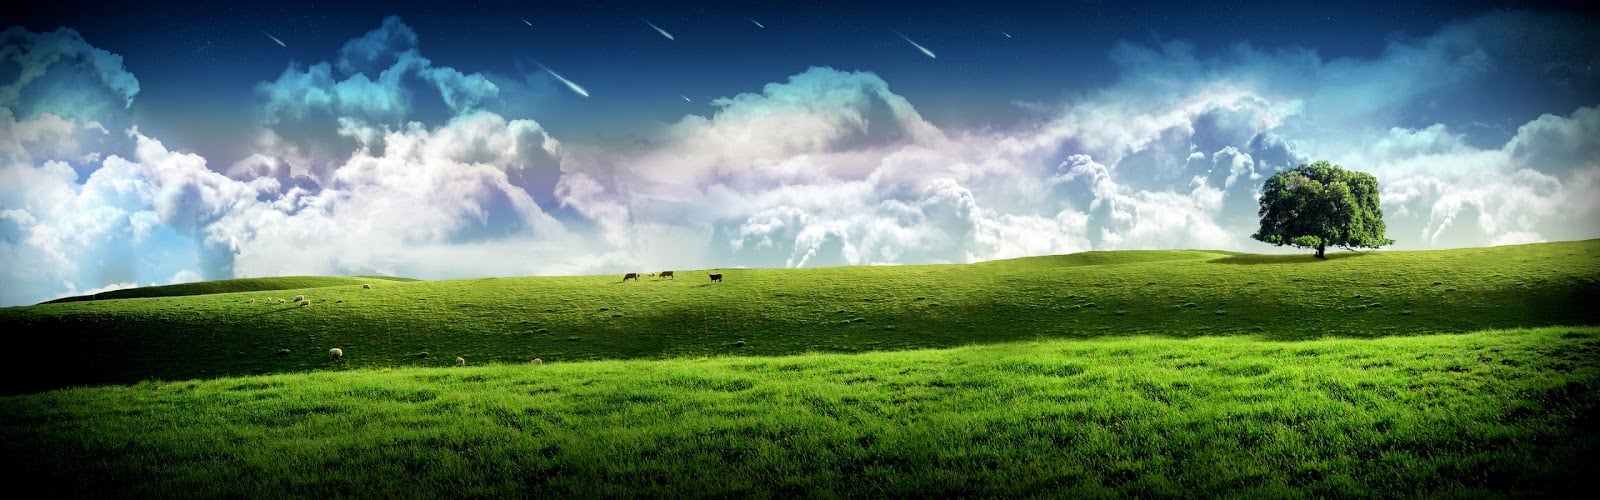 Wallpaper a day dual screen monitor extended countryside windows 1600x500